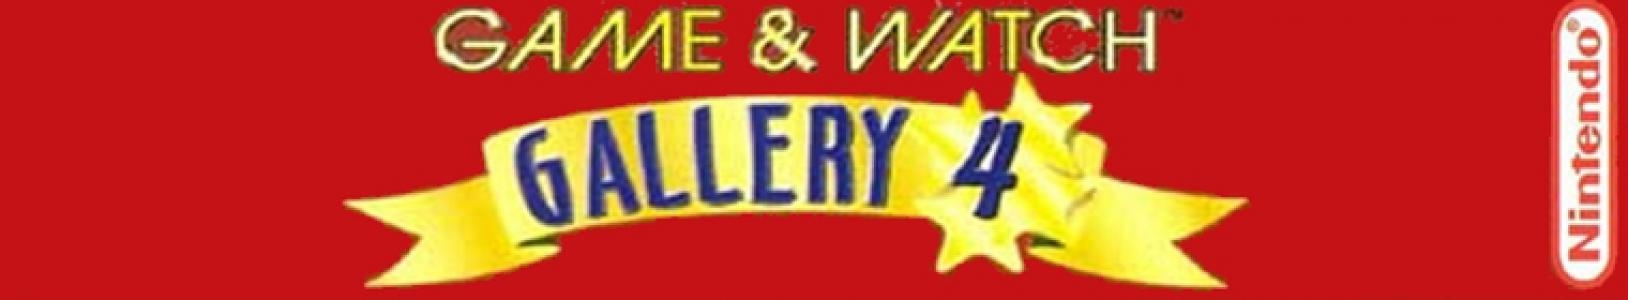 Game & Watch Gallery 4 banner